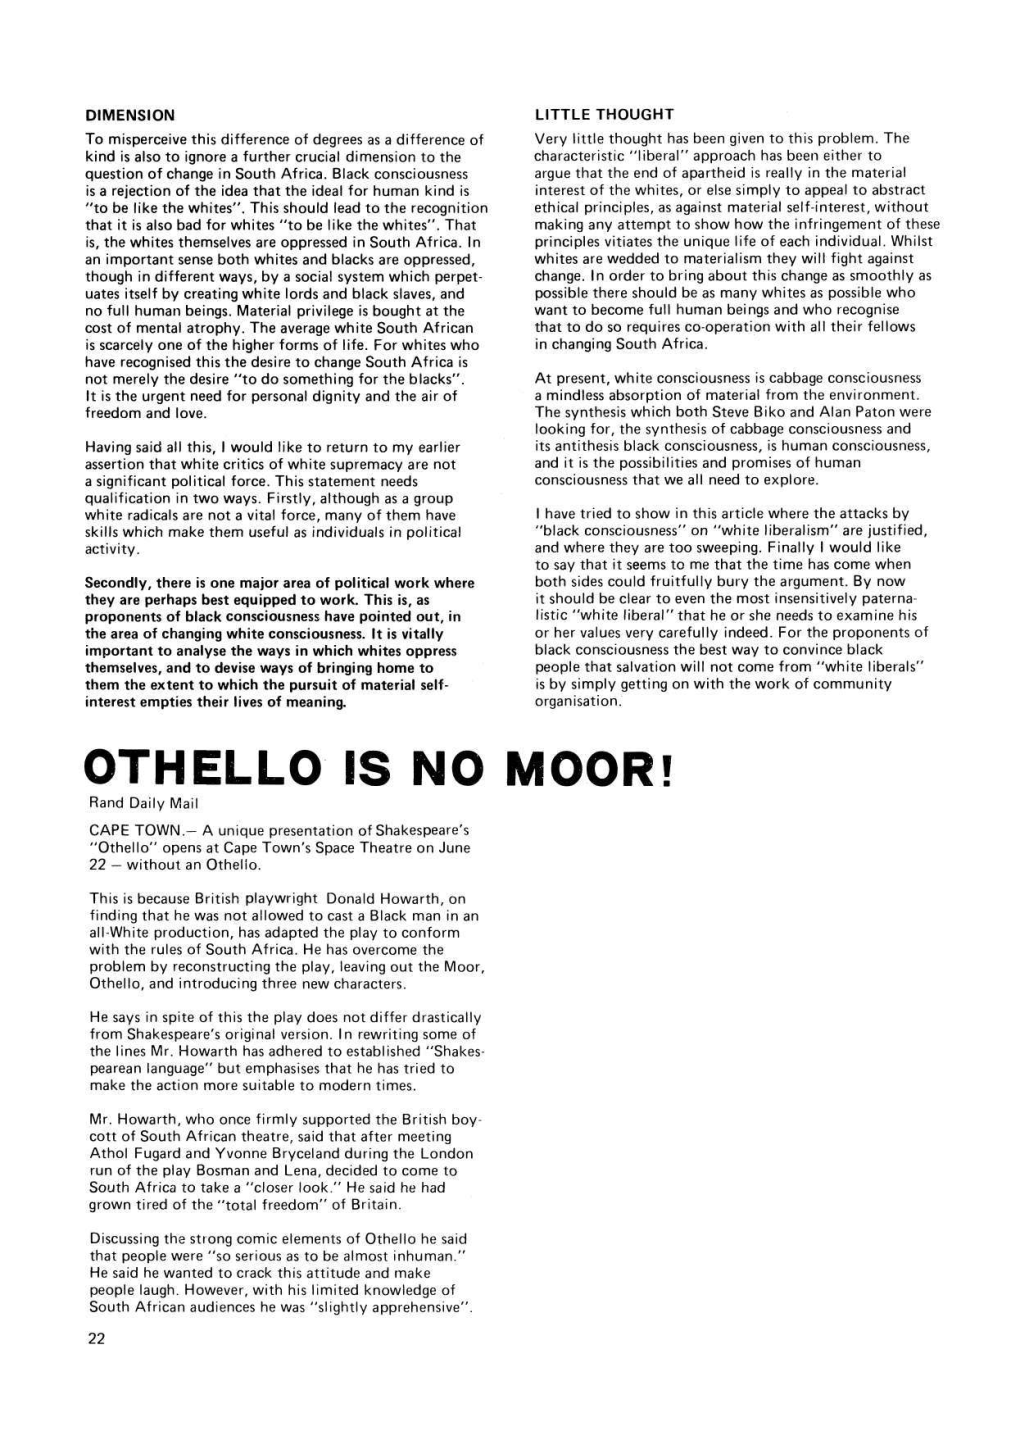 OTHELLO IS NO MOOR! Rand Daily Mail CAPE TOWN.- a Unique Presentation of Shakespeare's "Othello" Opens at Cape Town's Space Theatre on June 22 - Without an Othello